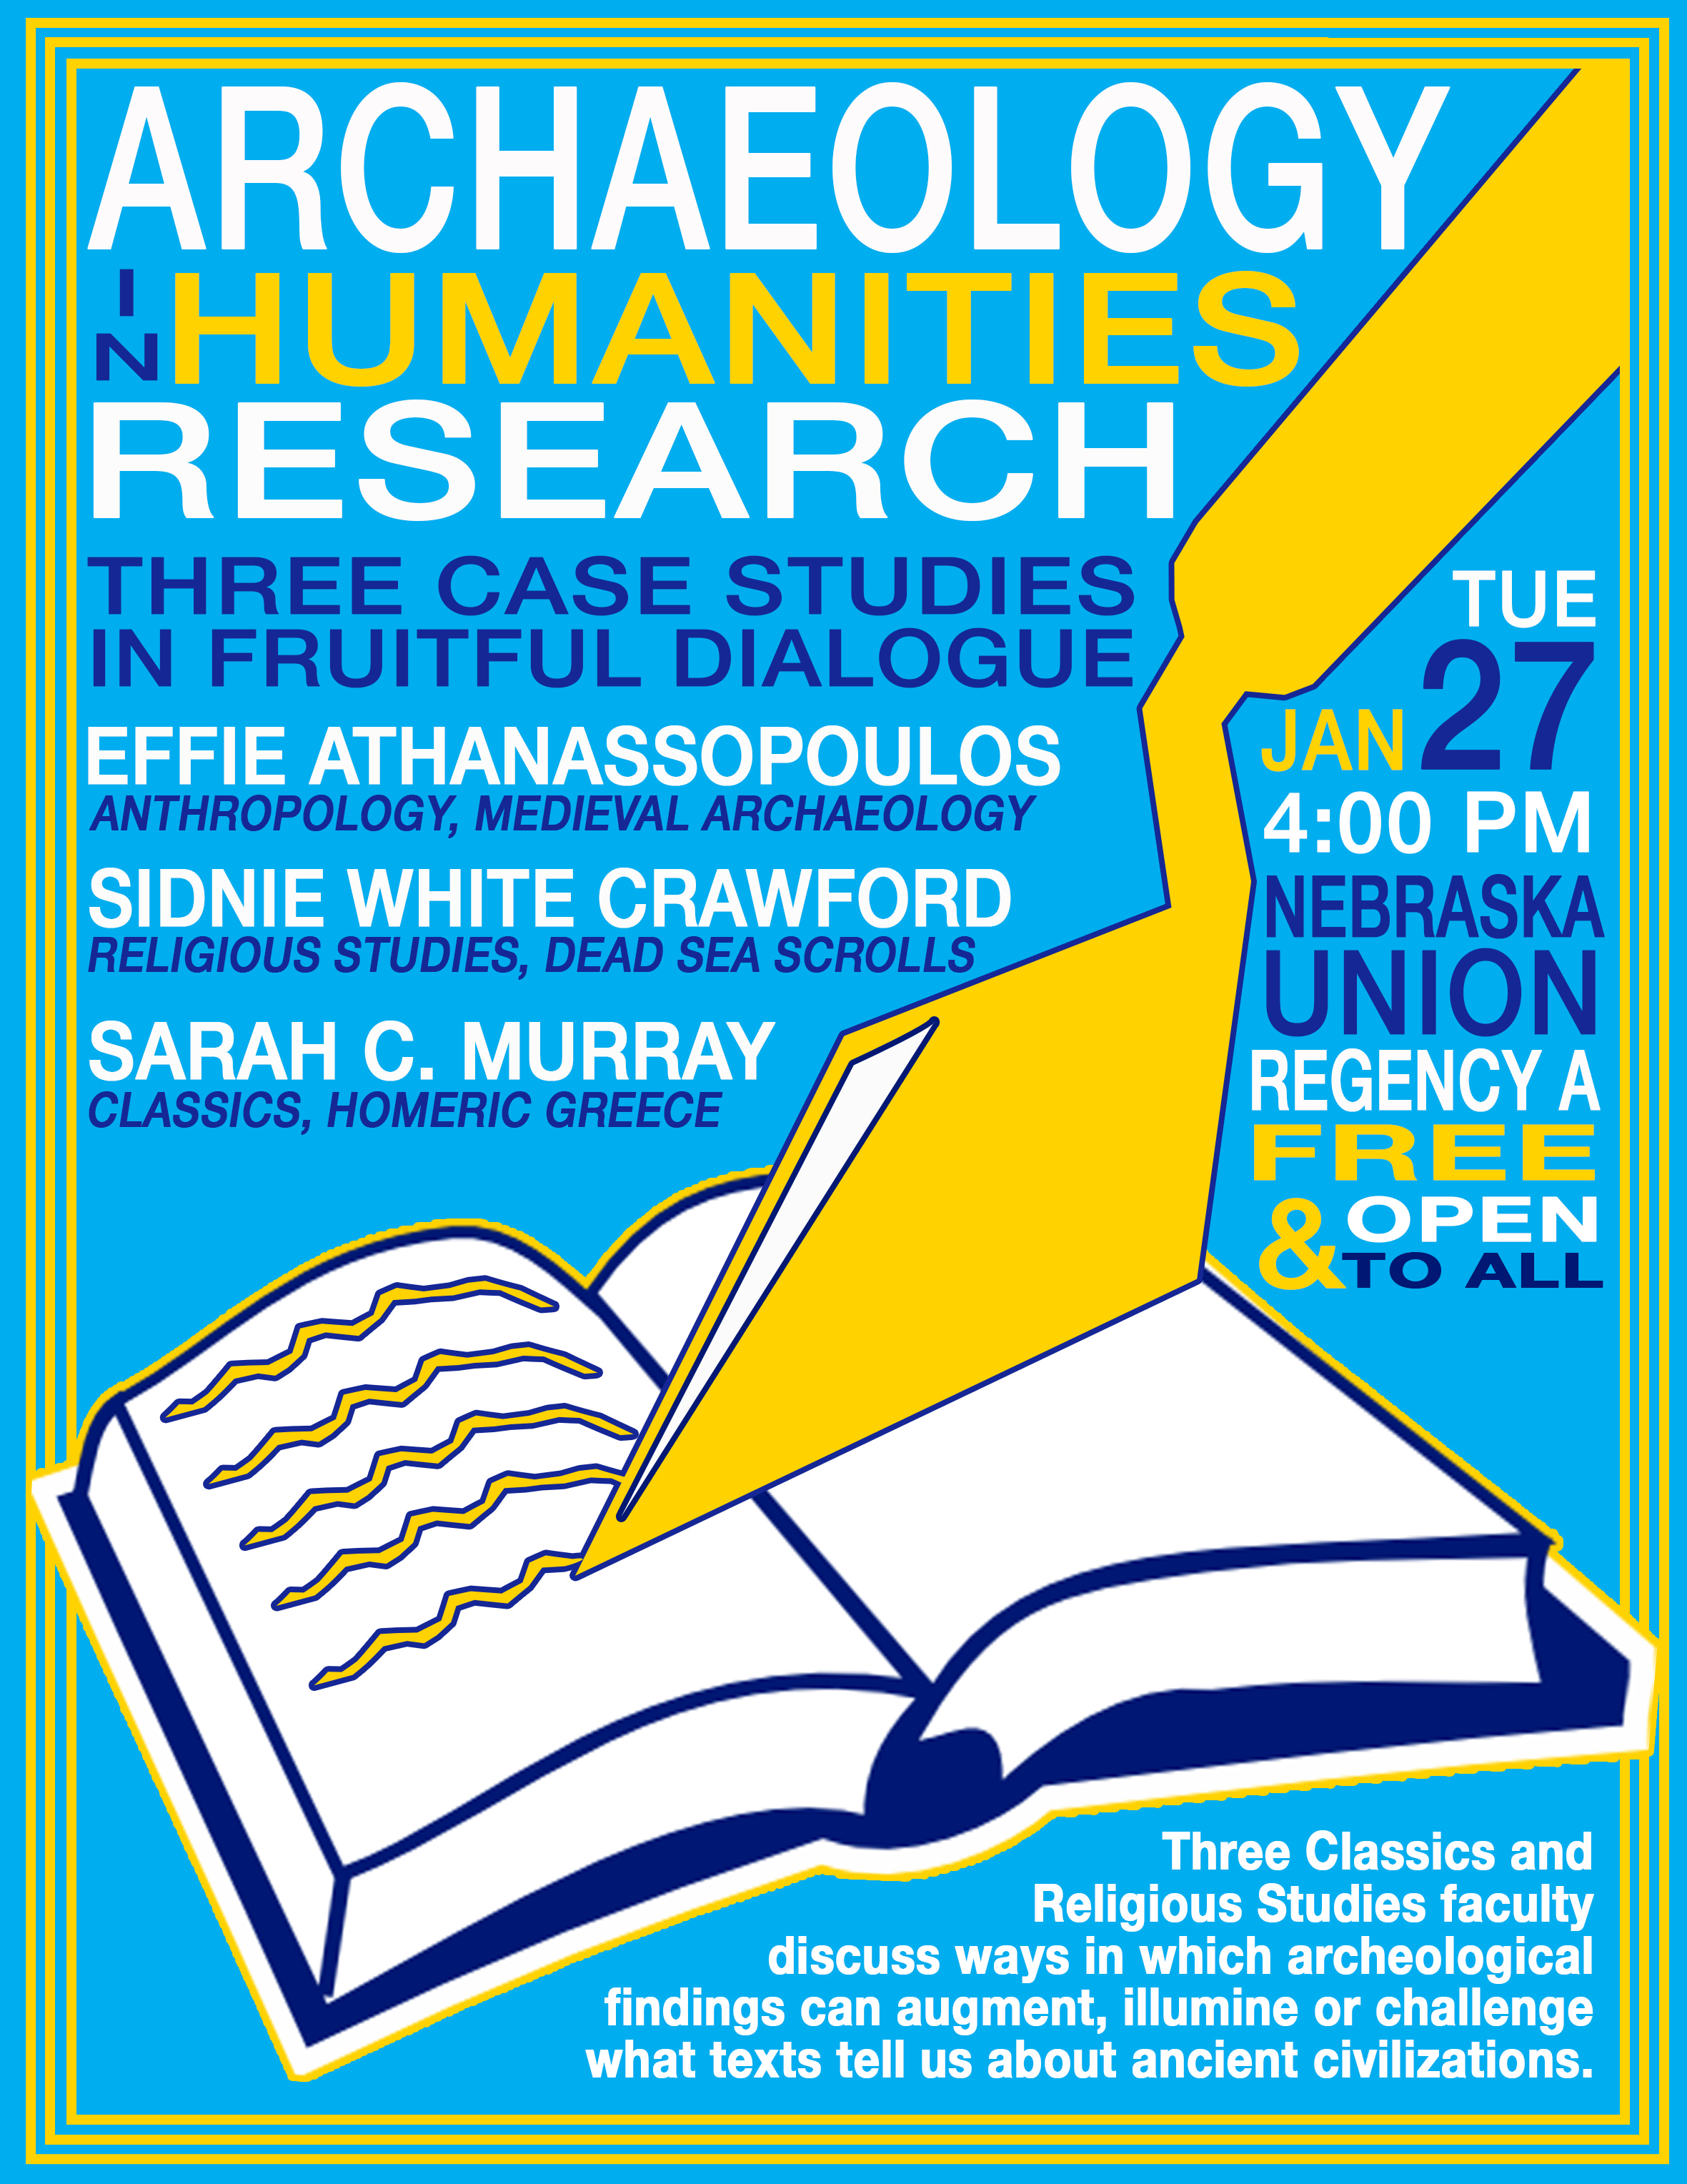 “Archaeology in Humanities Research: Three Case Studies in Fruitful Dialogue”